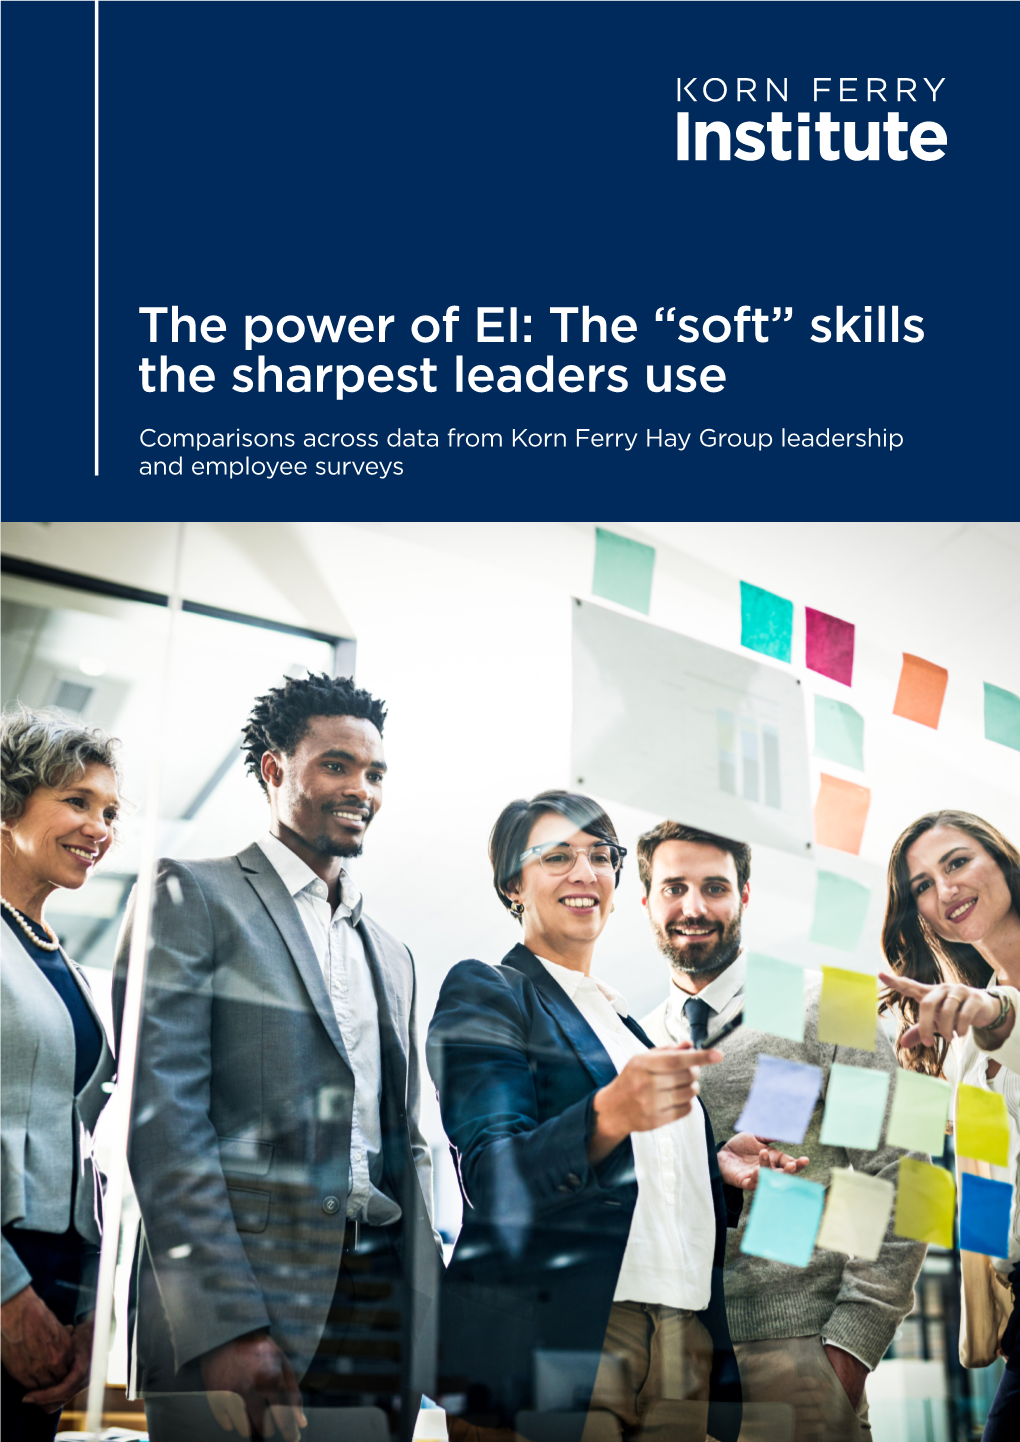 The Power of EI: the "Soft" Skills the Sharpest Leaders